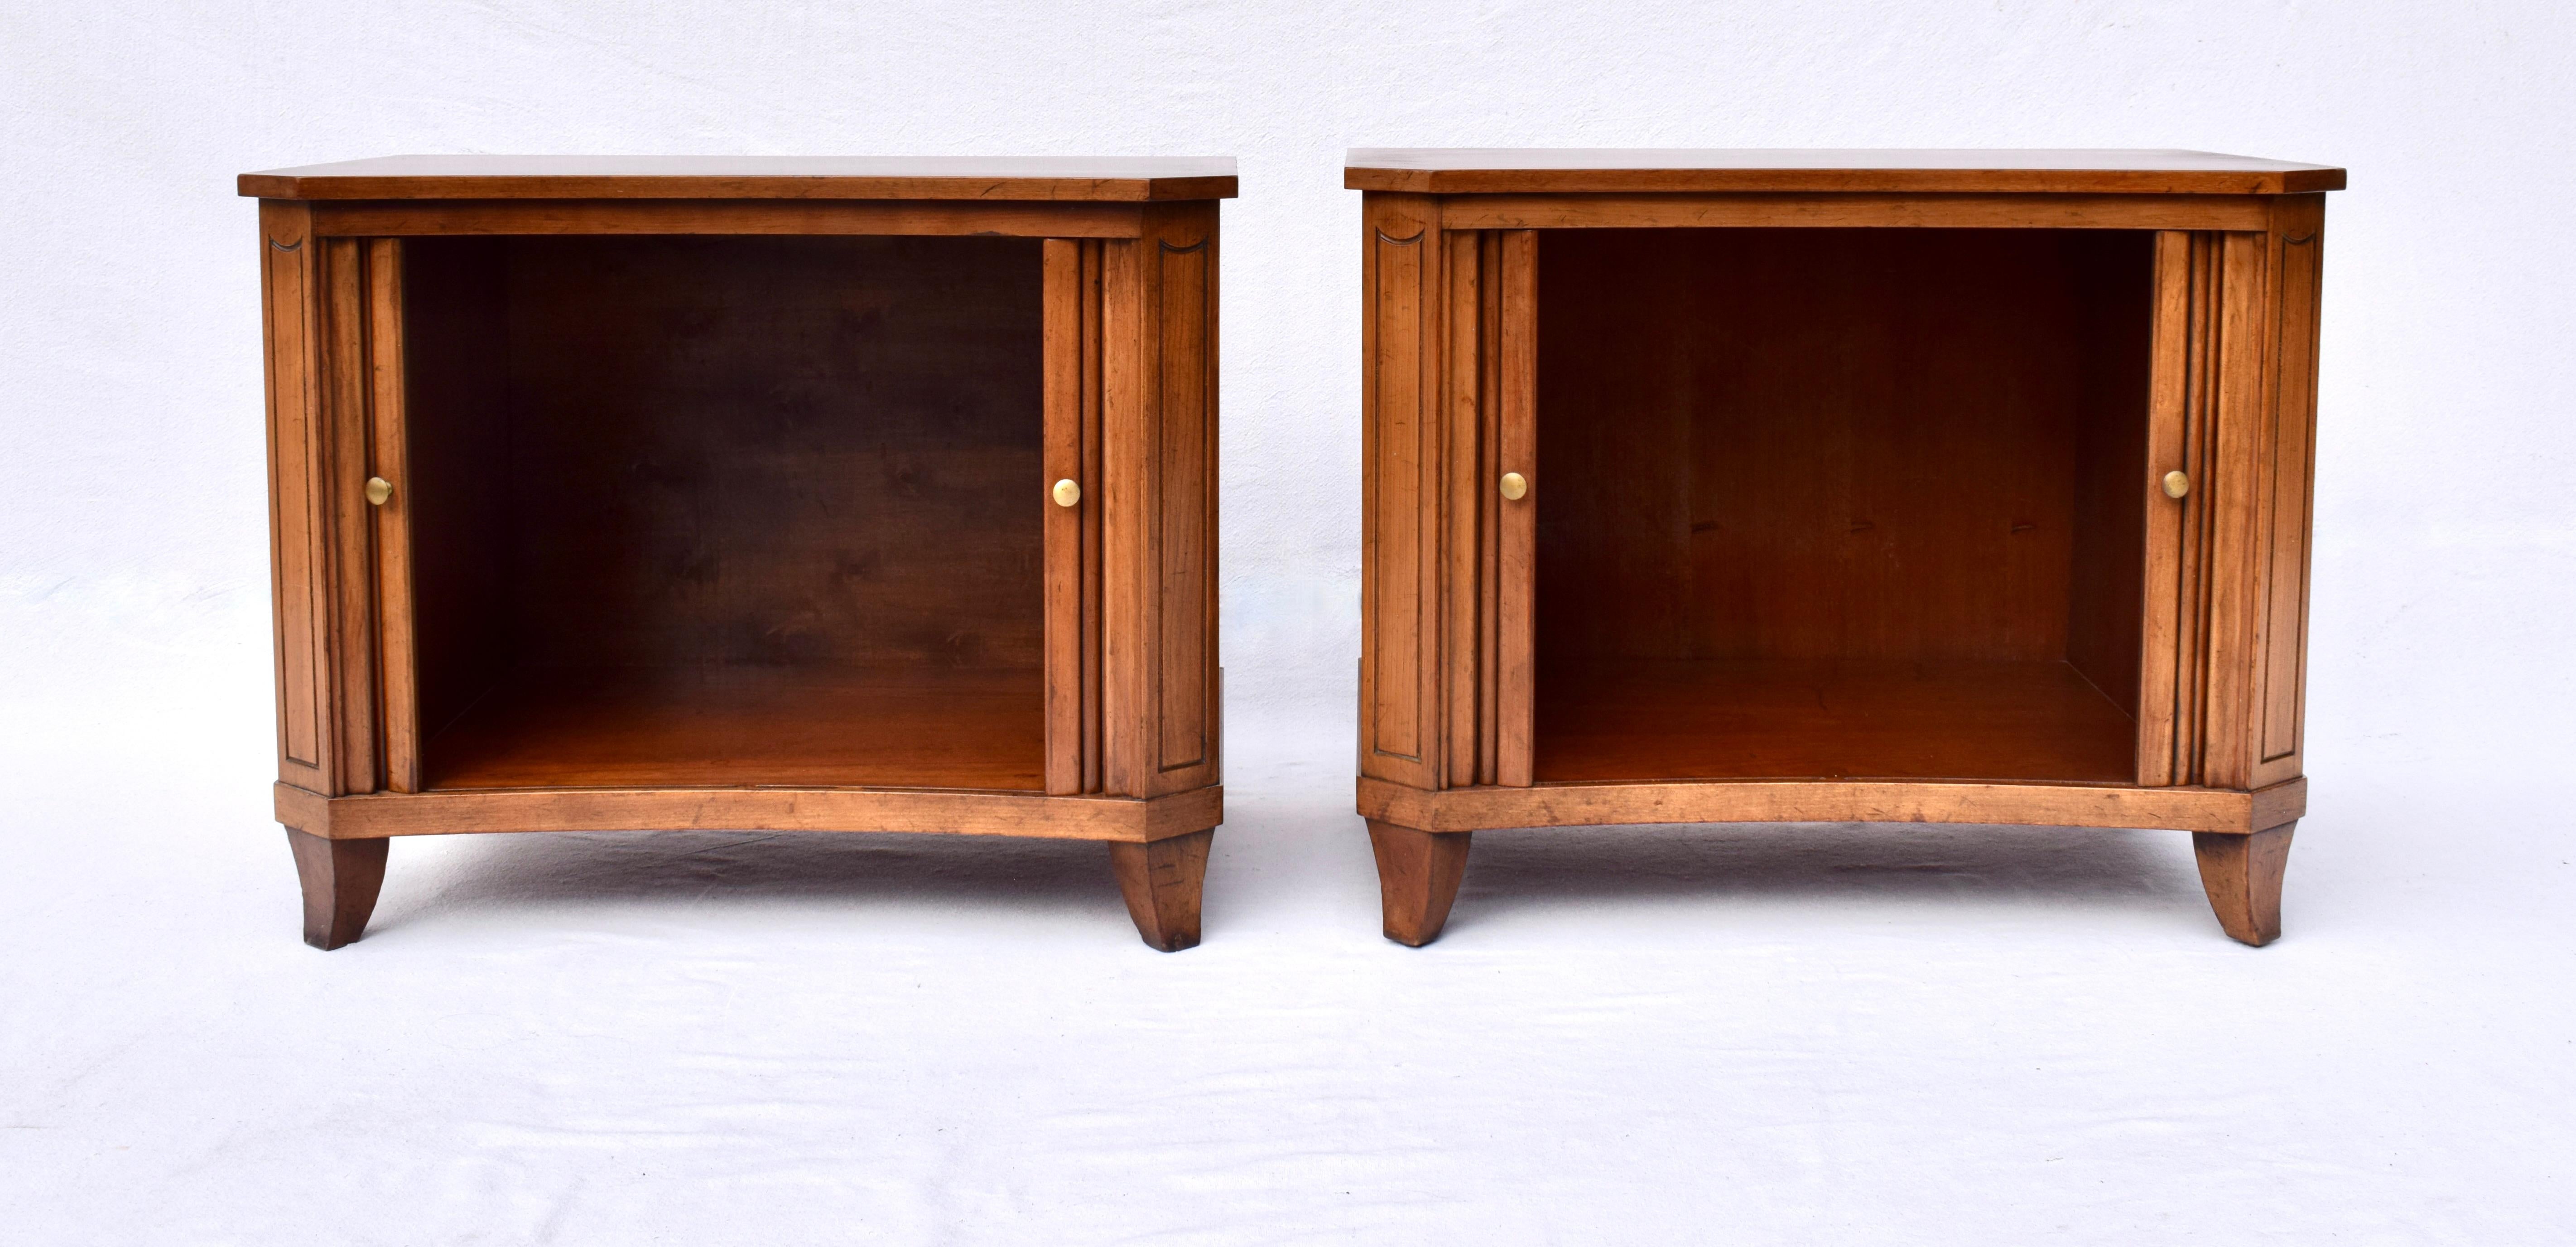 Impressive mid 20th century Baker Furniture tambour door nightstand cabinets with curved fronts. Newly refinished tops ready for use. Each retains the original Baker medallion.